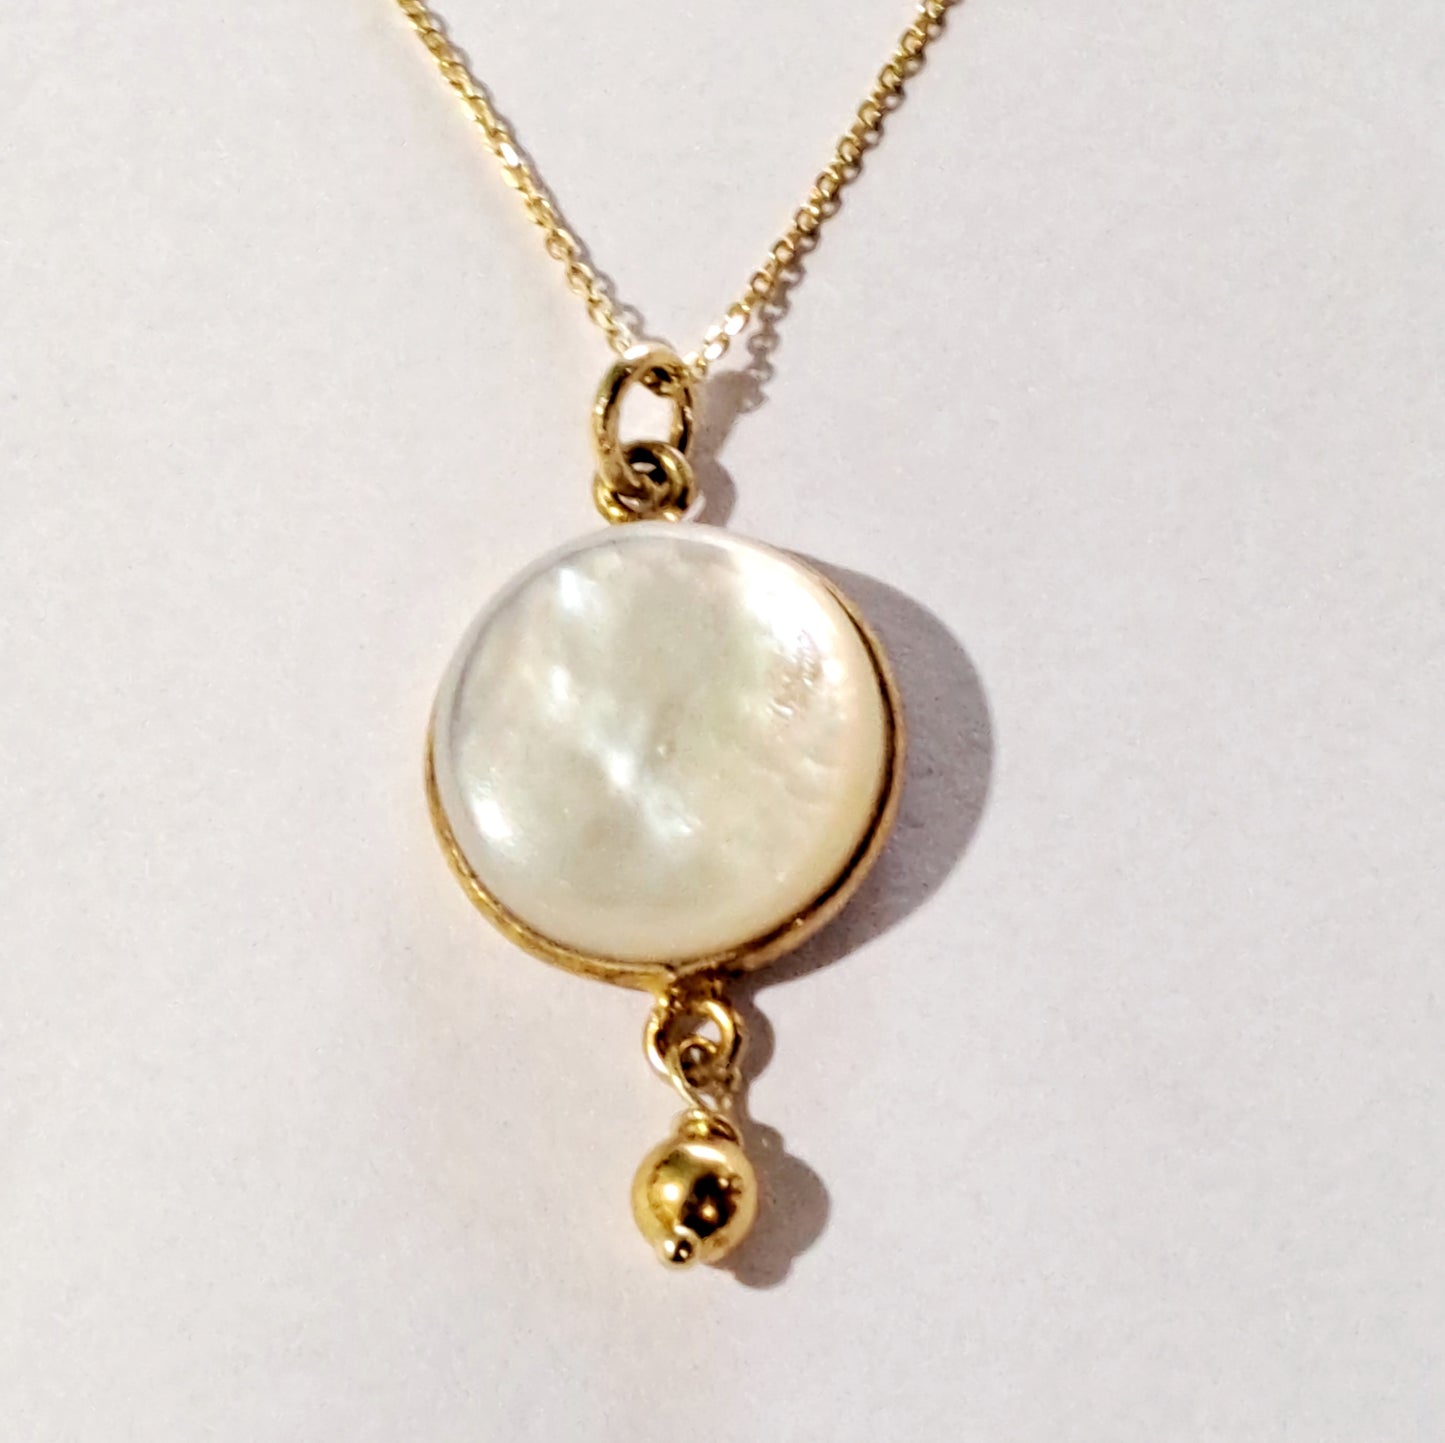 Handmade  gold plated sterling silver necklace with mother of pearl.